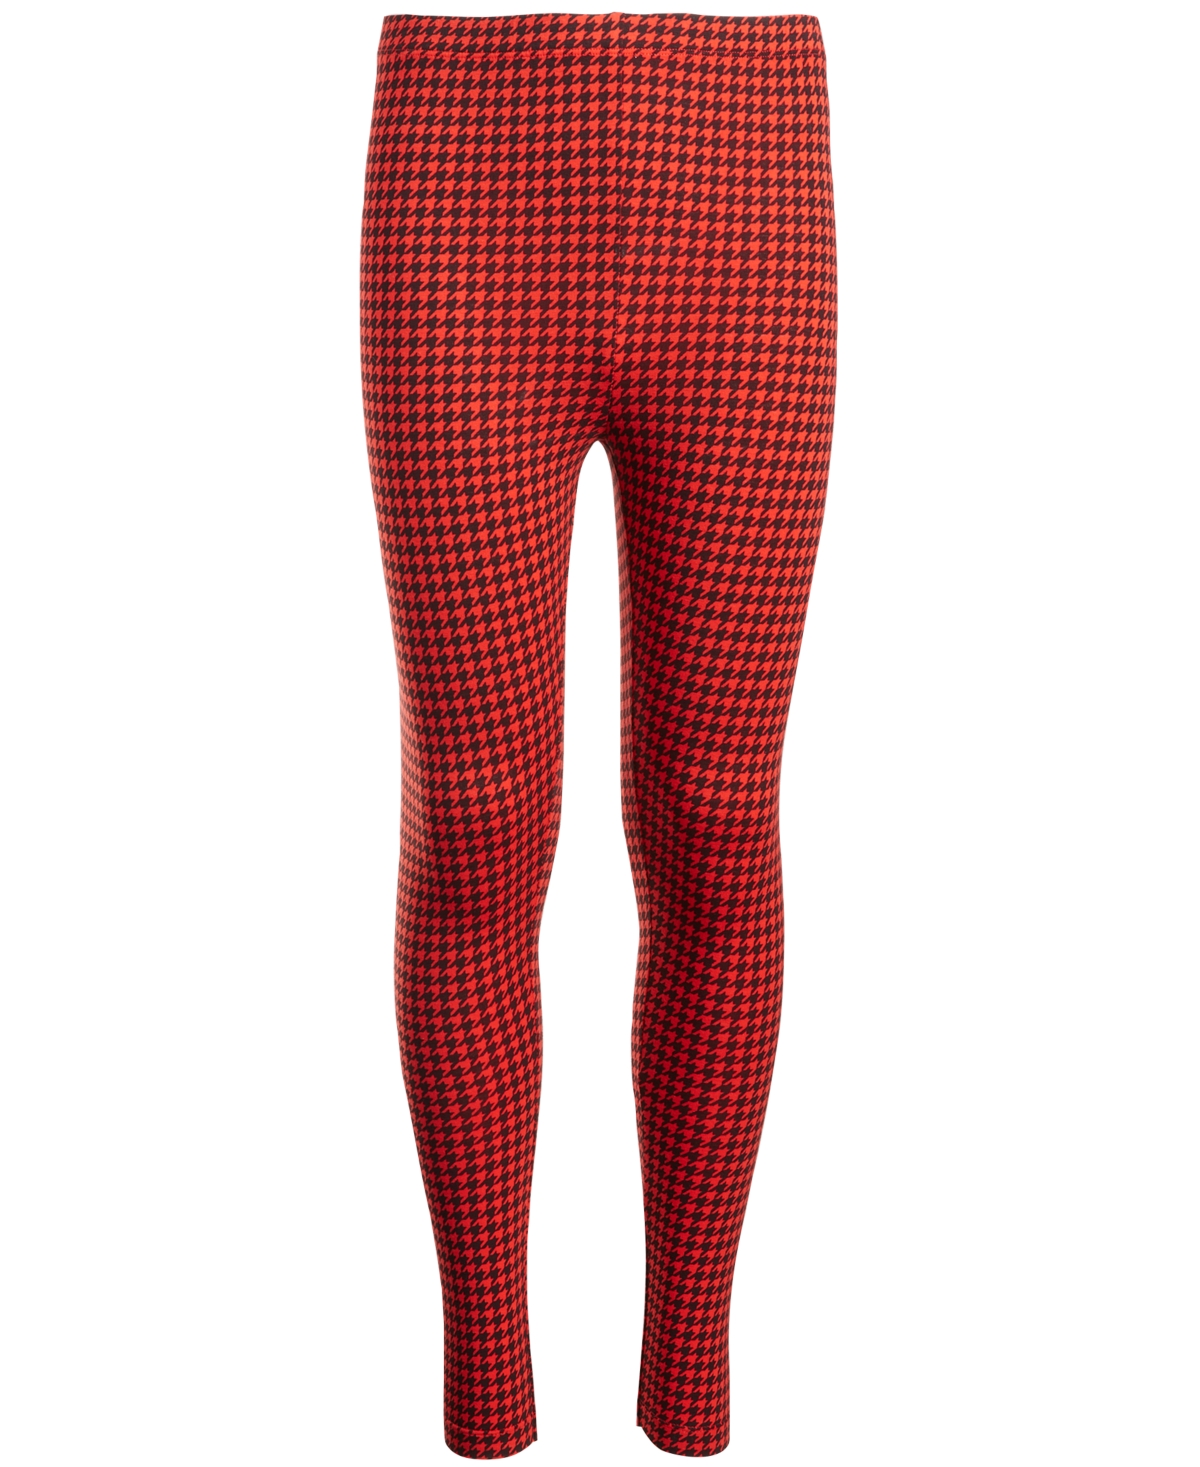 Epic Threads Kids' Big Girls Houndstooth Print Leggings, Created For Macy's In Fiesta Red